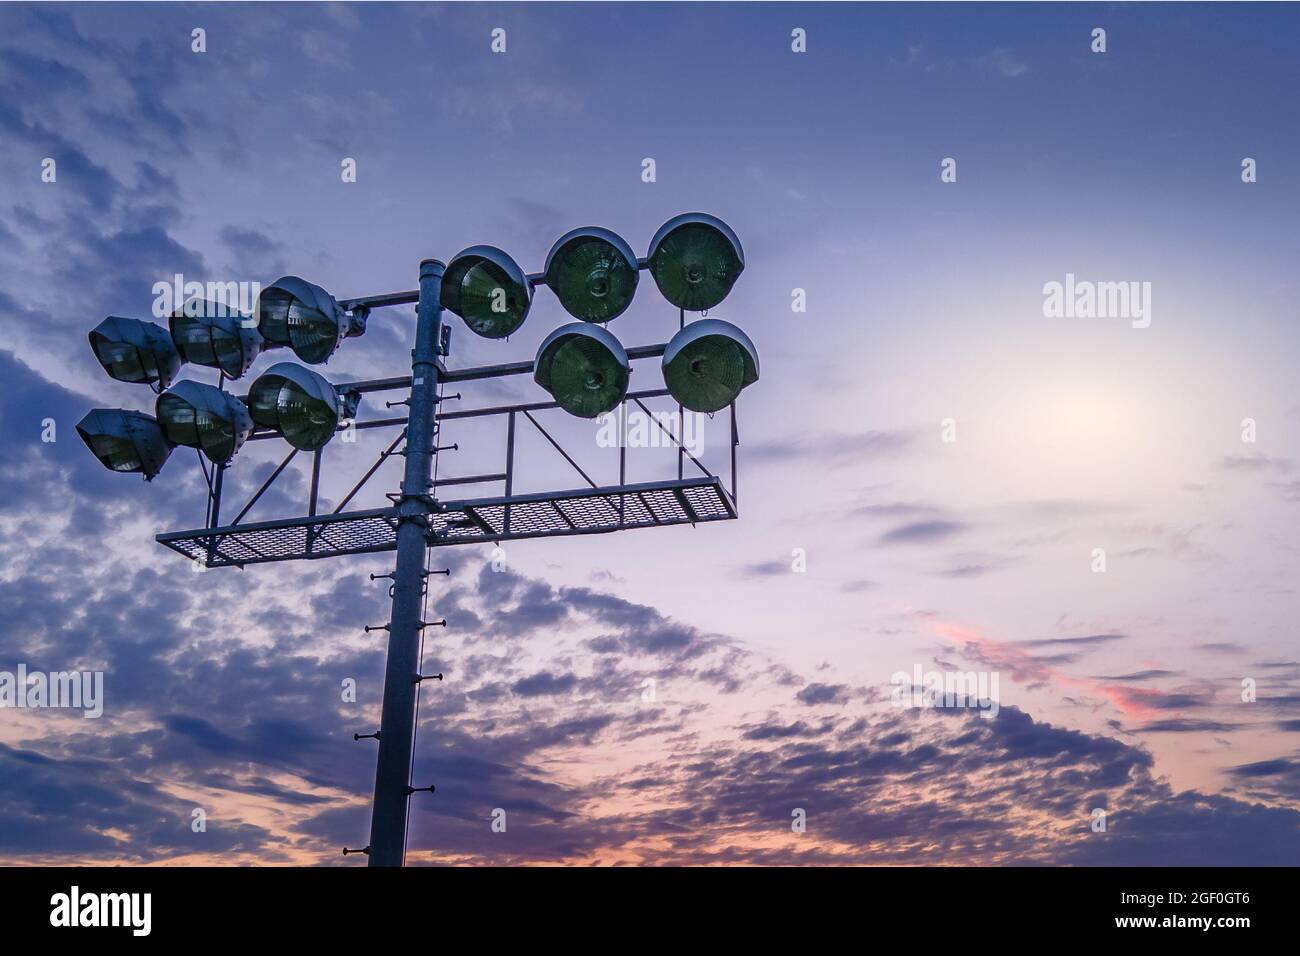 A beautiful golden hour sky with sport stadium lights in the foreground against a cloudy sky. Stock Photo